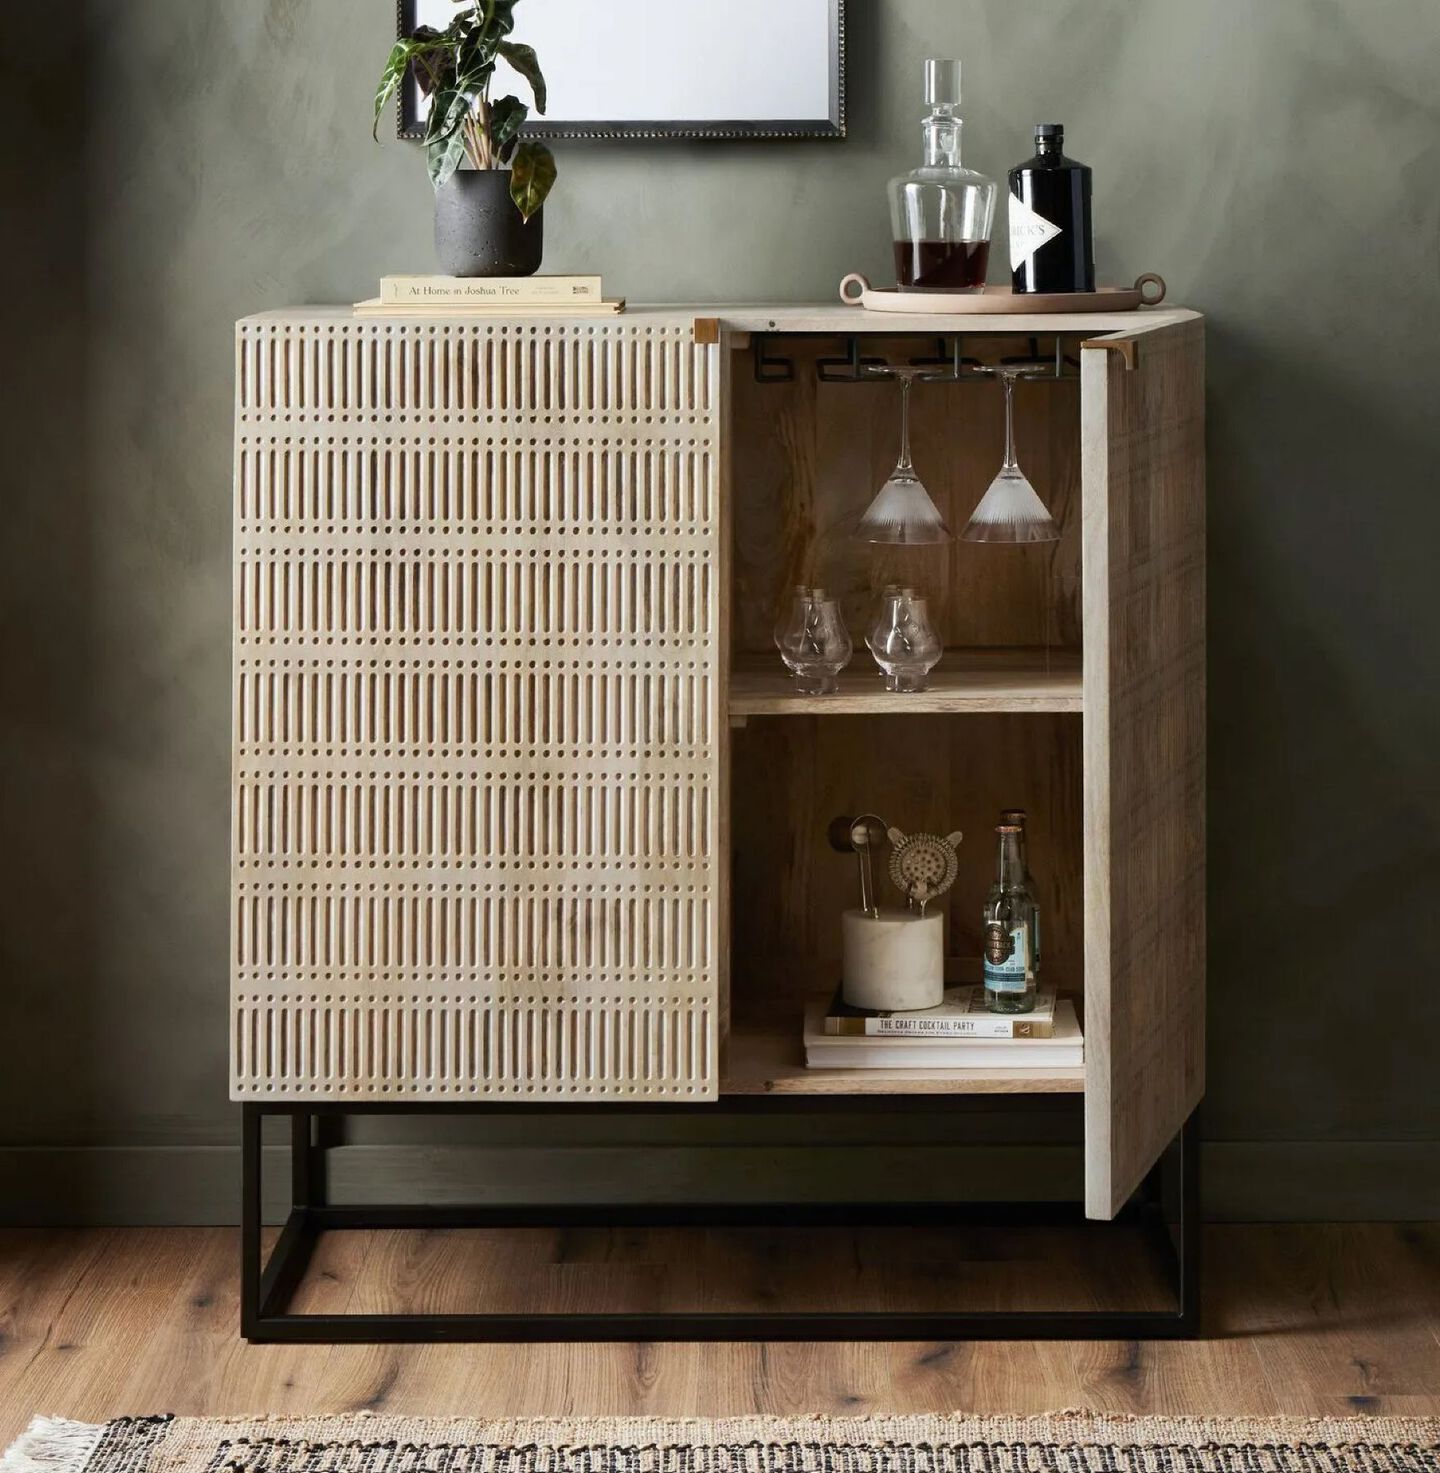 Light brown wooden cabinet with black hardware and one open door